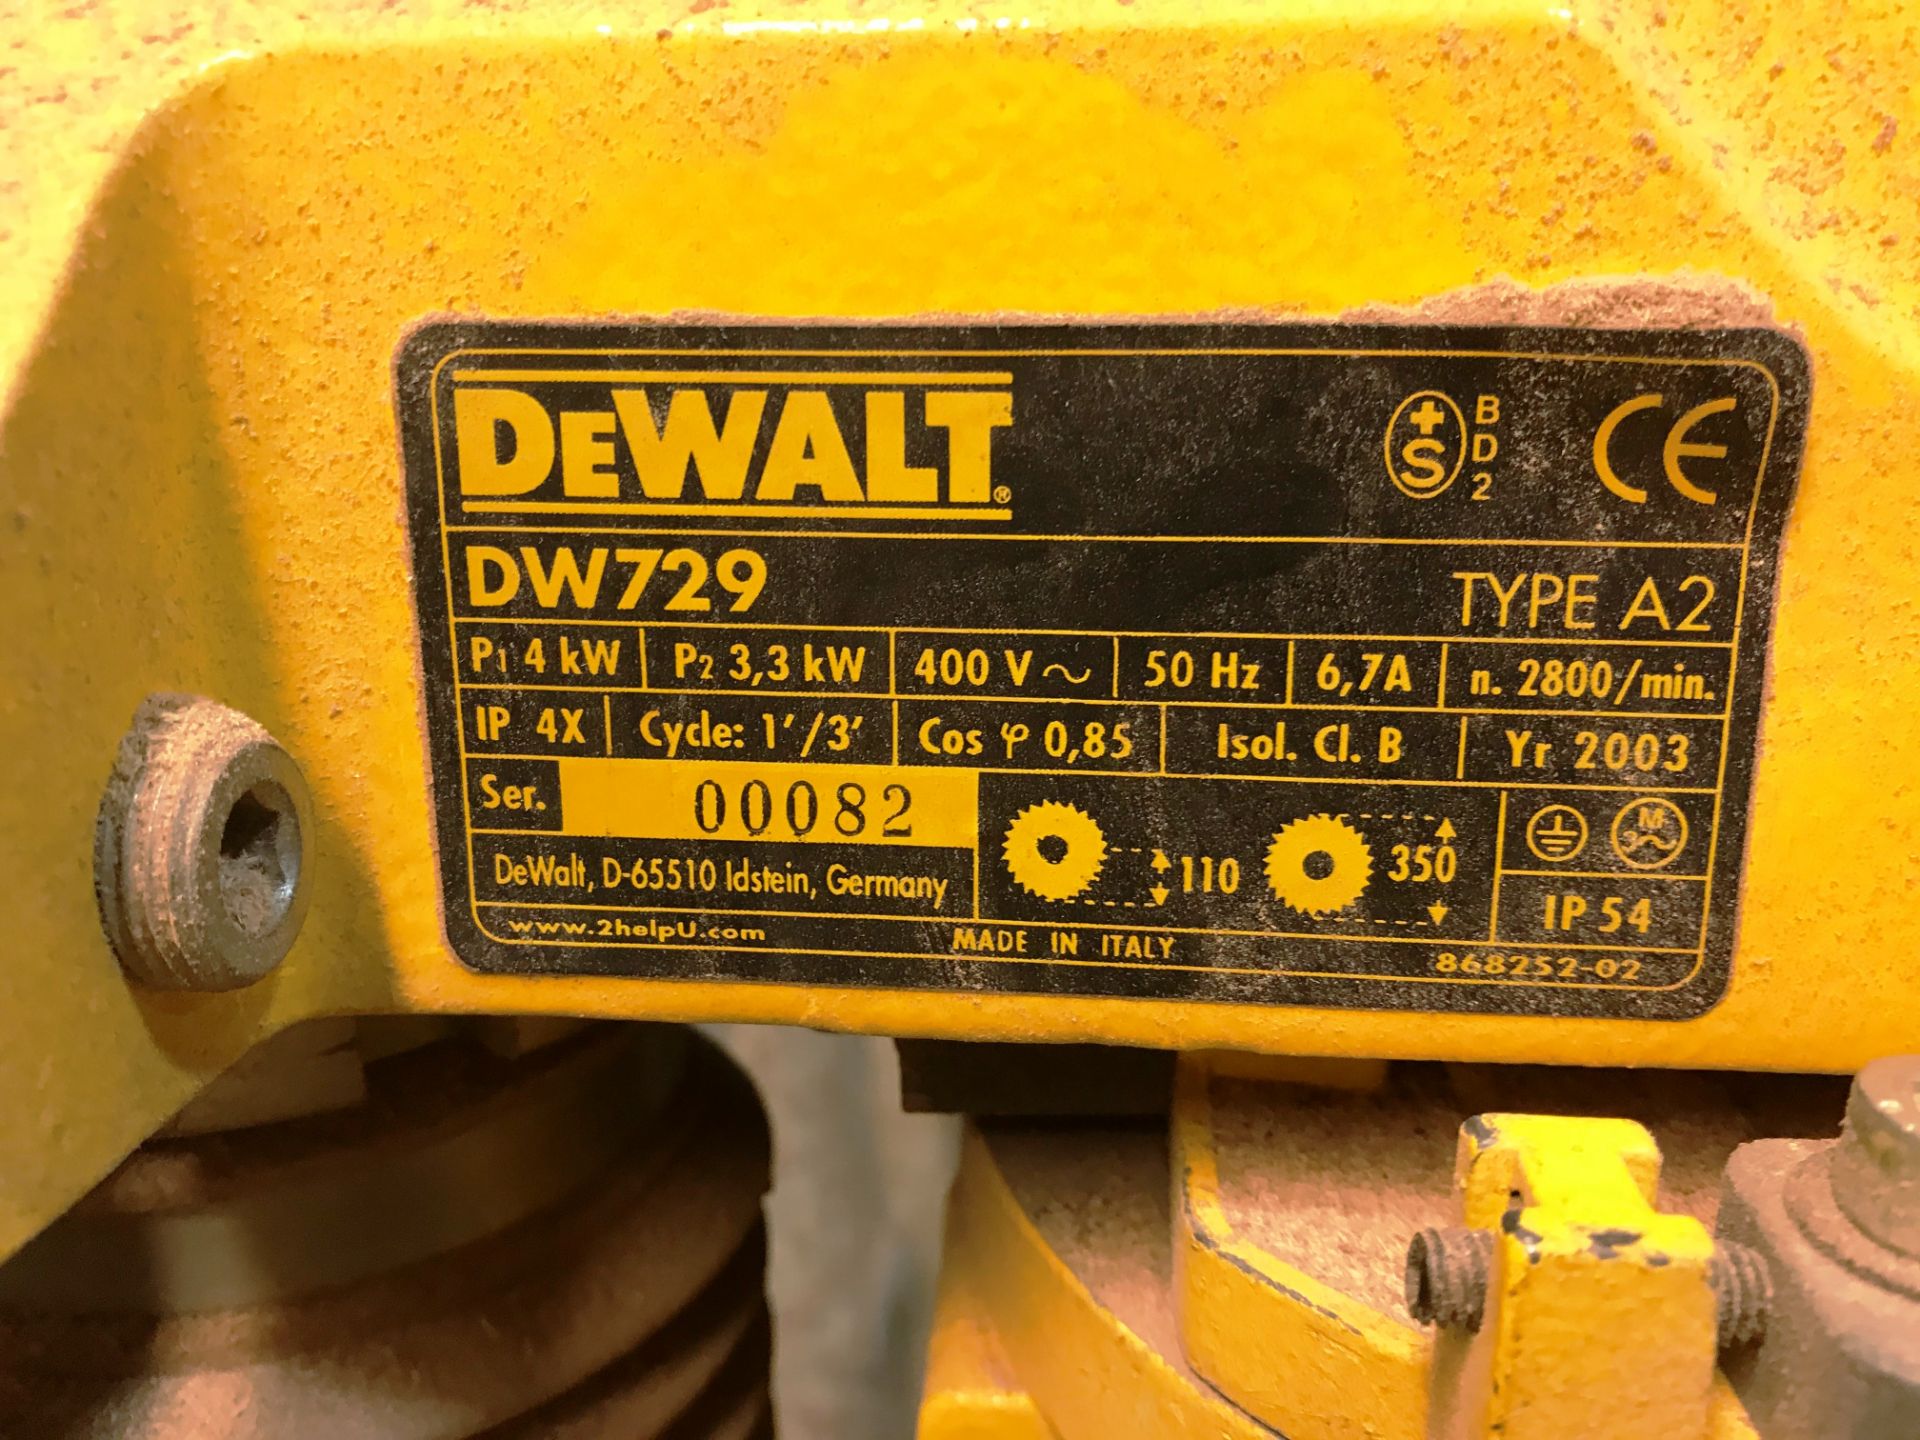 Dewalt DW729 Cross Cut Saw w/ Roller Feed In/Out & Measuring Bar | 3 Phase - Image 4 of 7